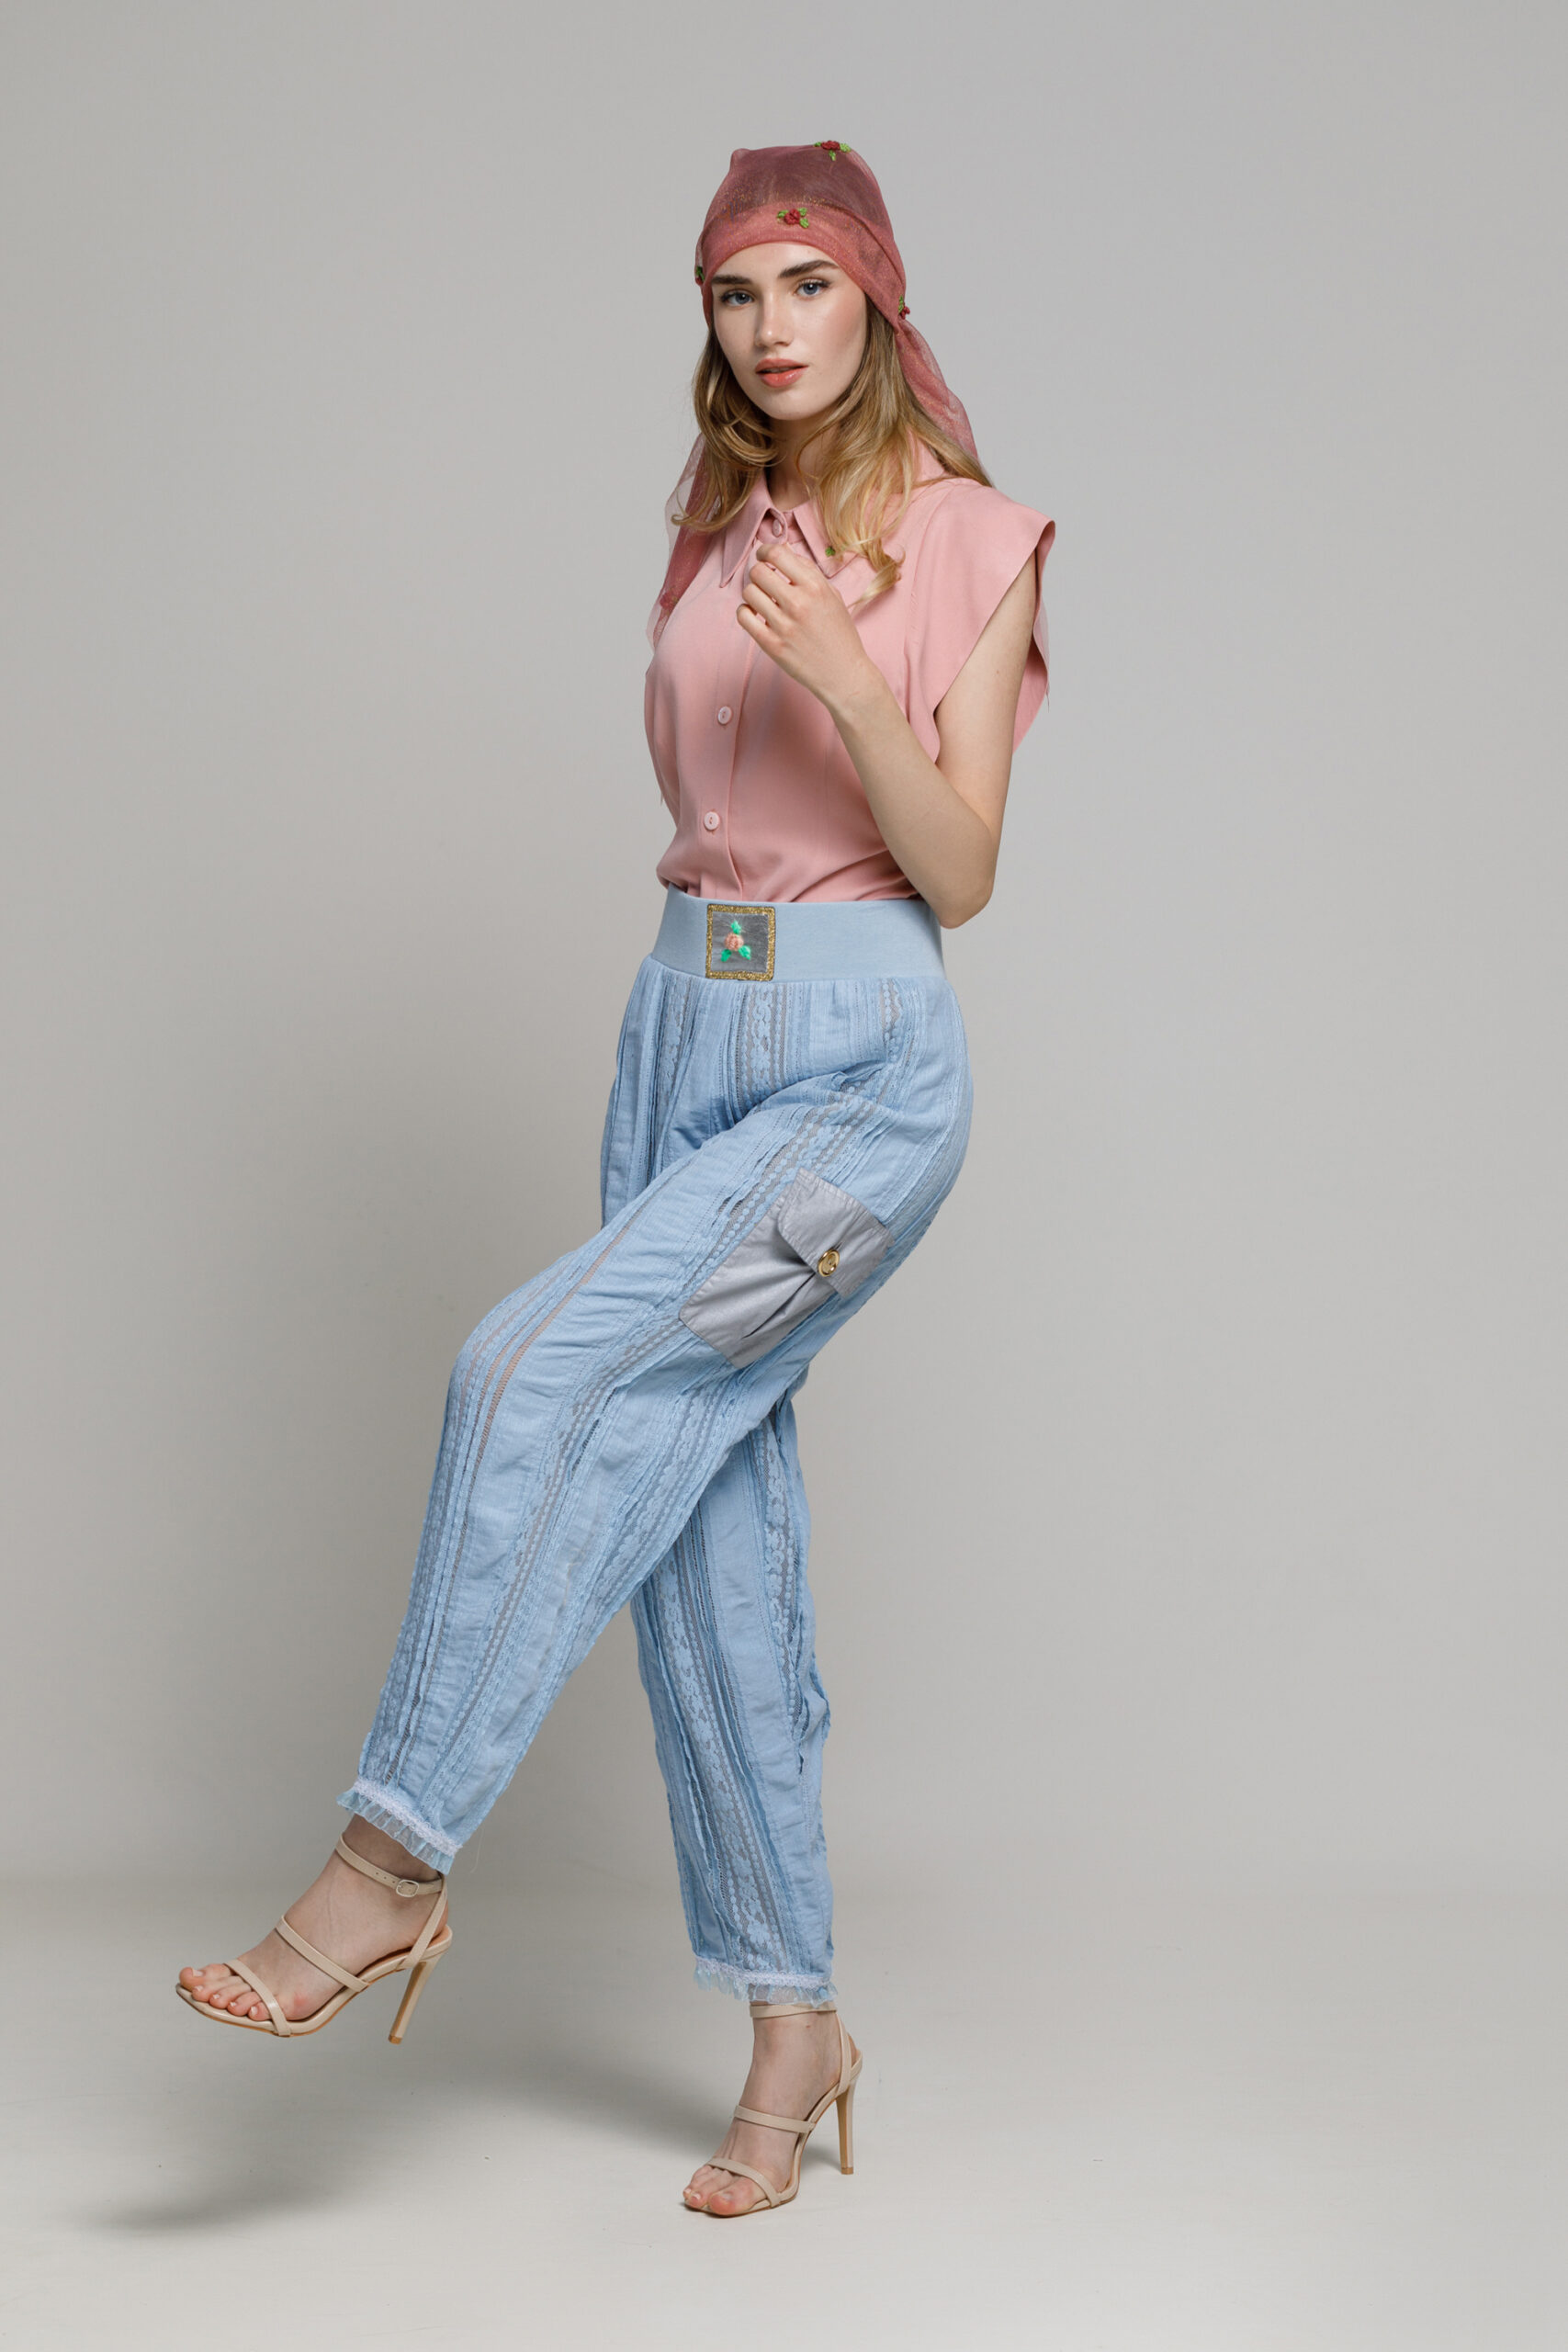 RONNIE blue lace pants with pockets. Natural fabrics, original design, handmade embroidery